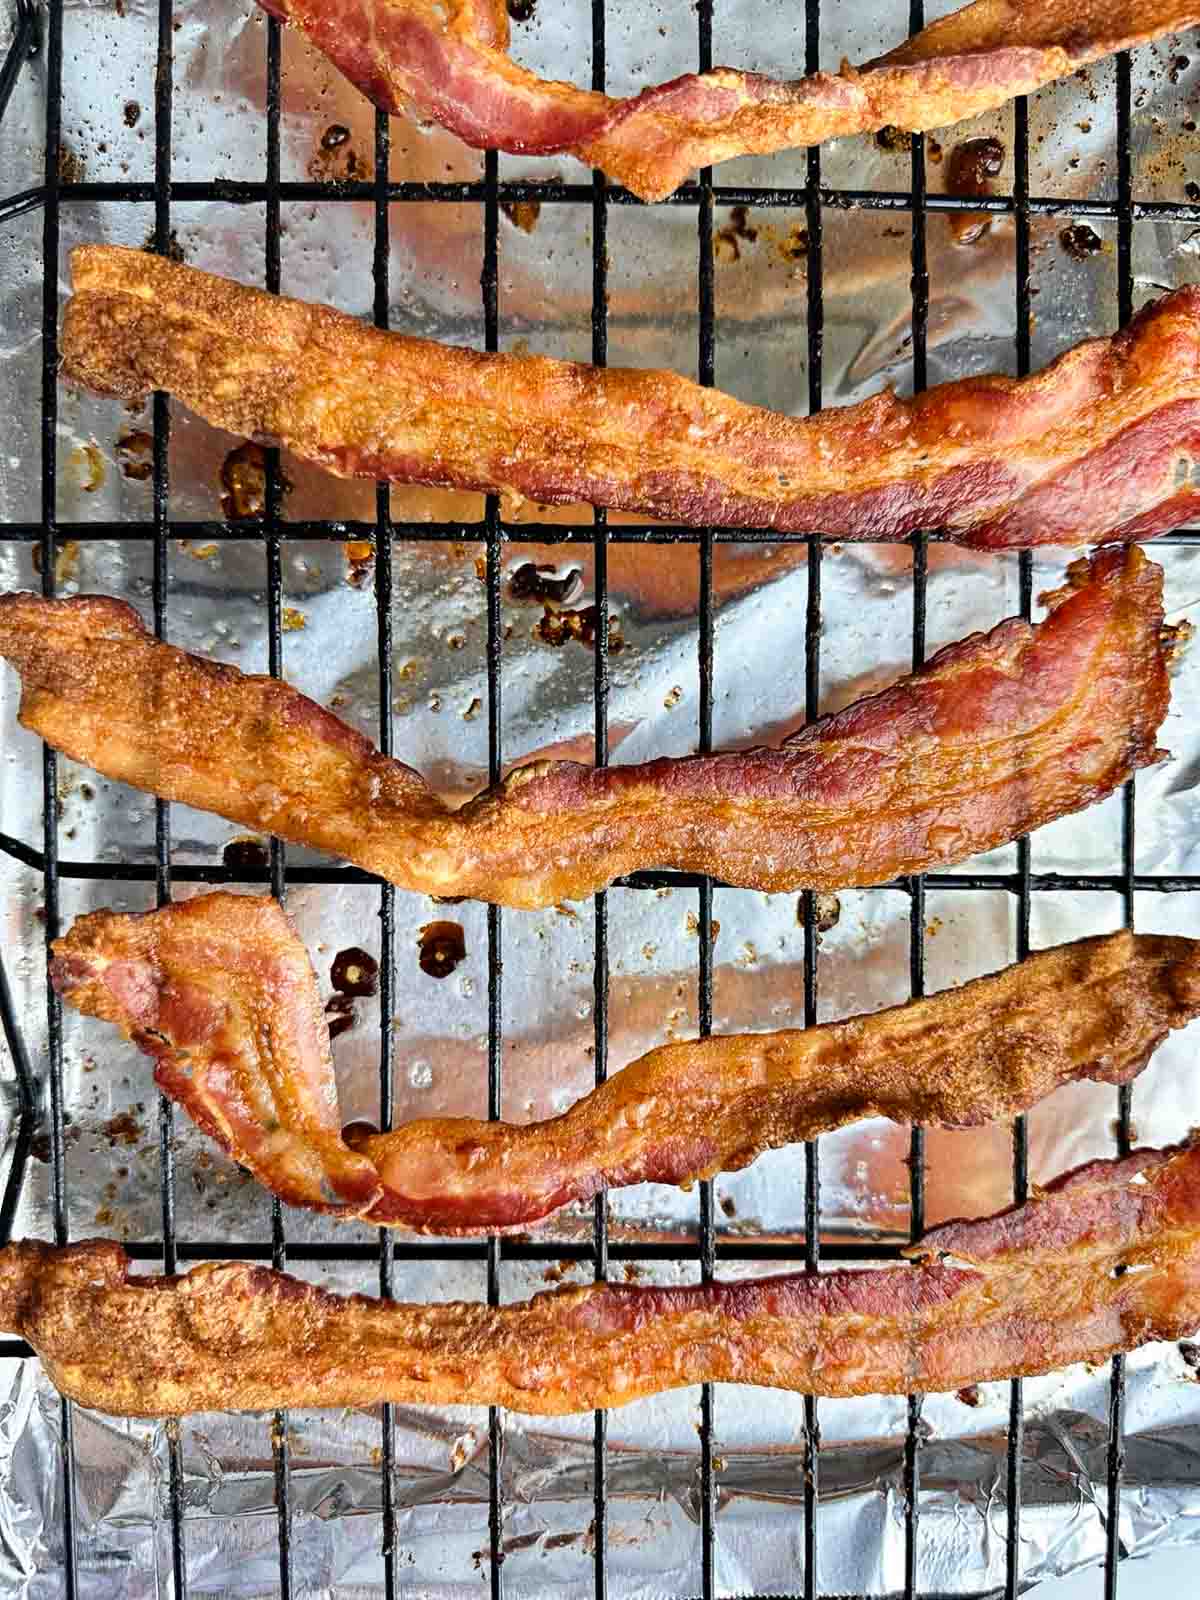 Extra crispy convection oven bacon sitting on a wire rack over a foil lined cookie sheet